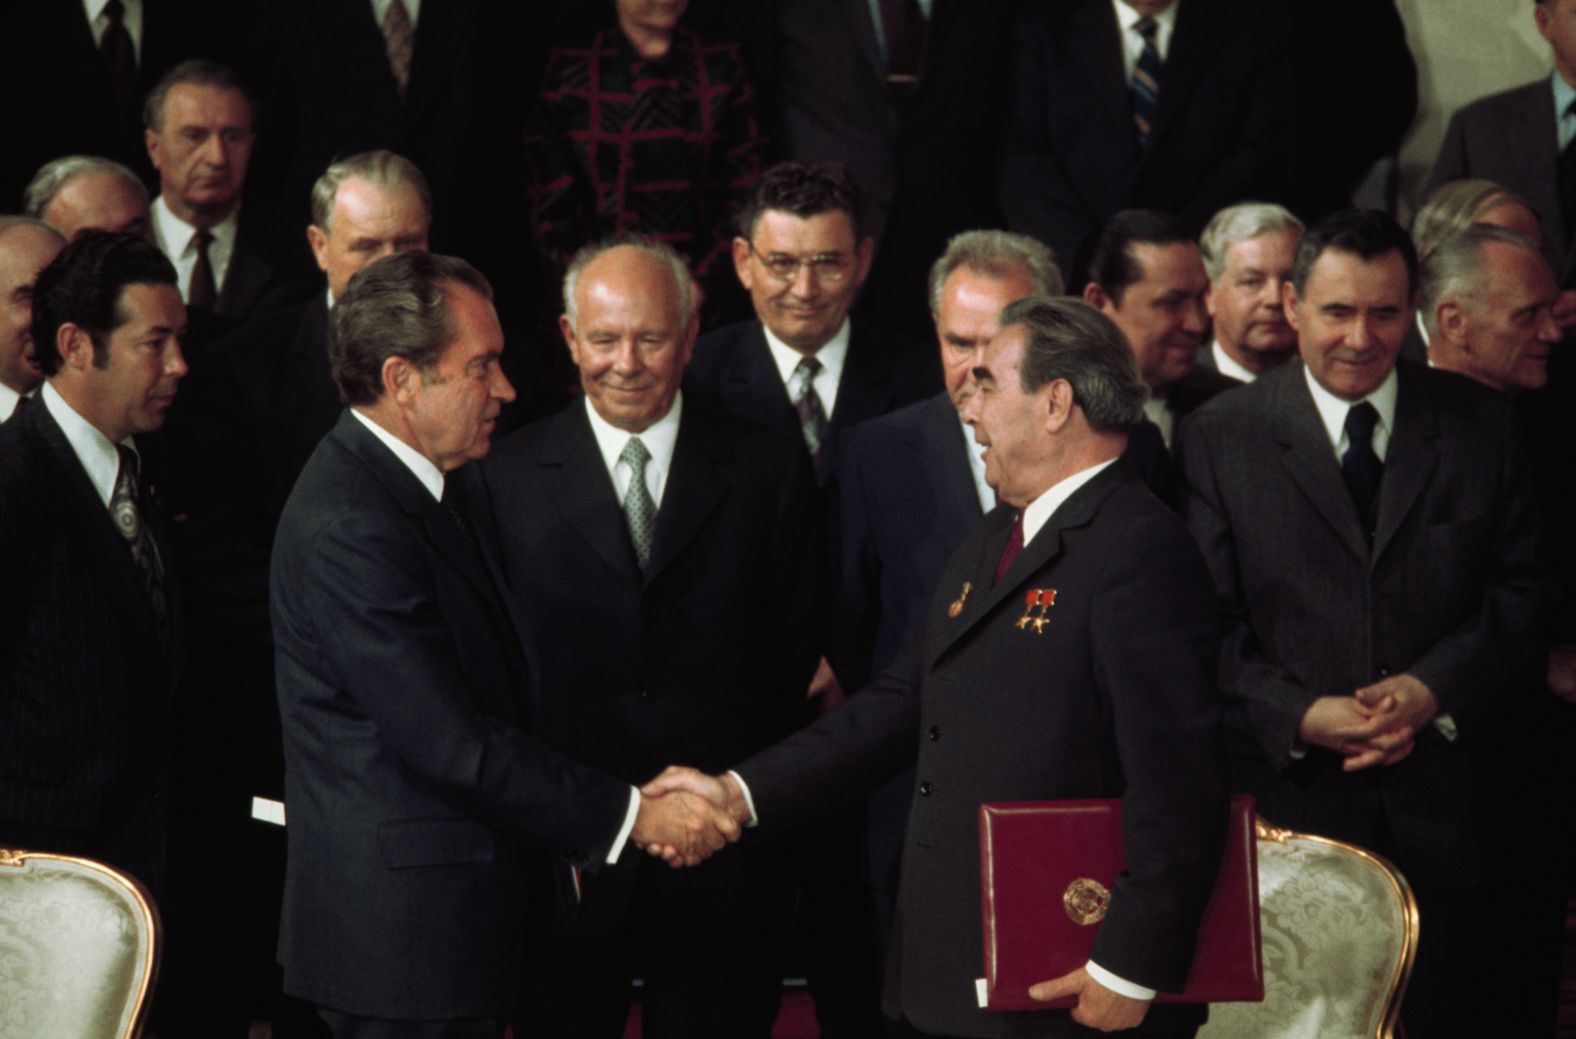 With Kremlin leaders and Presidential aides looking on, US President Richard Nixon shakes hands with Communist Party Chairman Leonid Brezhnev after signing one of several agreements made during their seven-day summit in 1974.